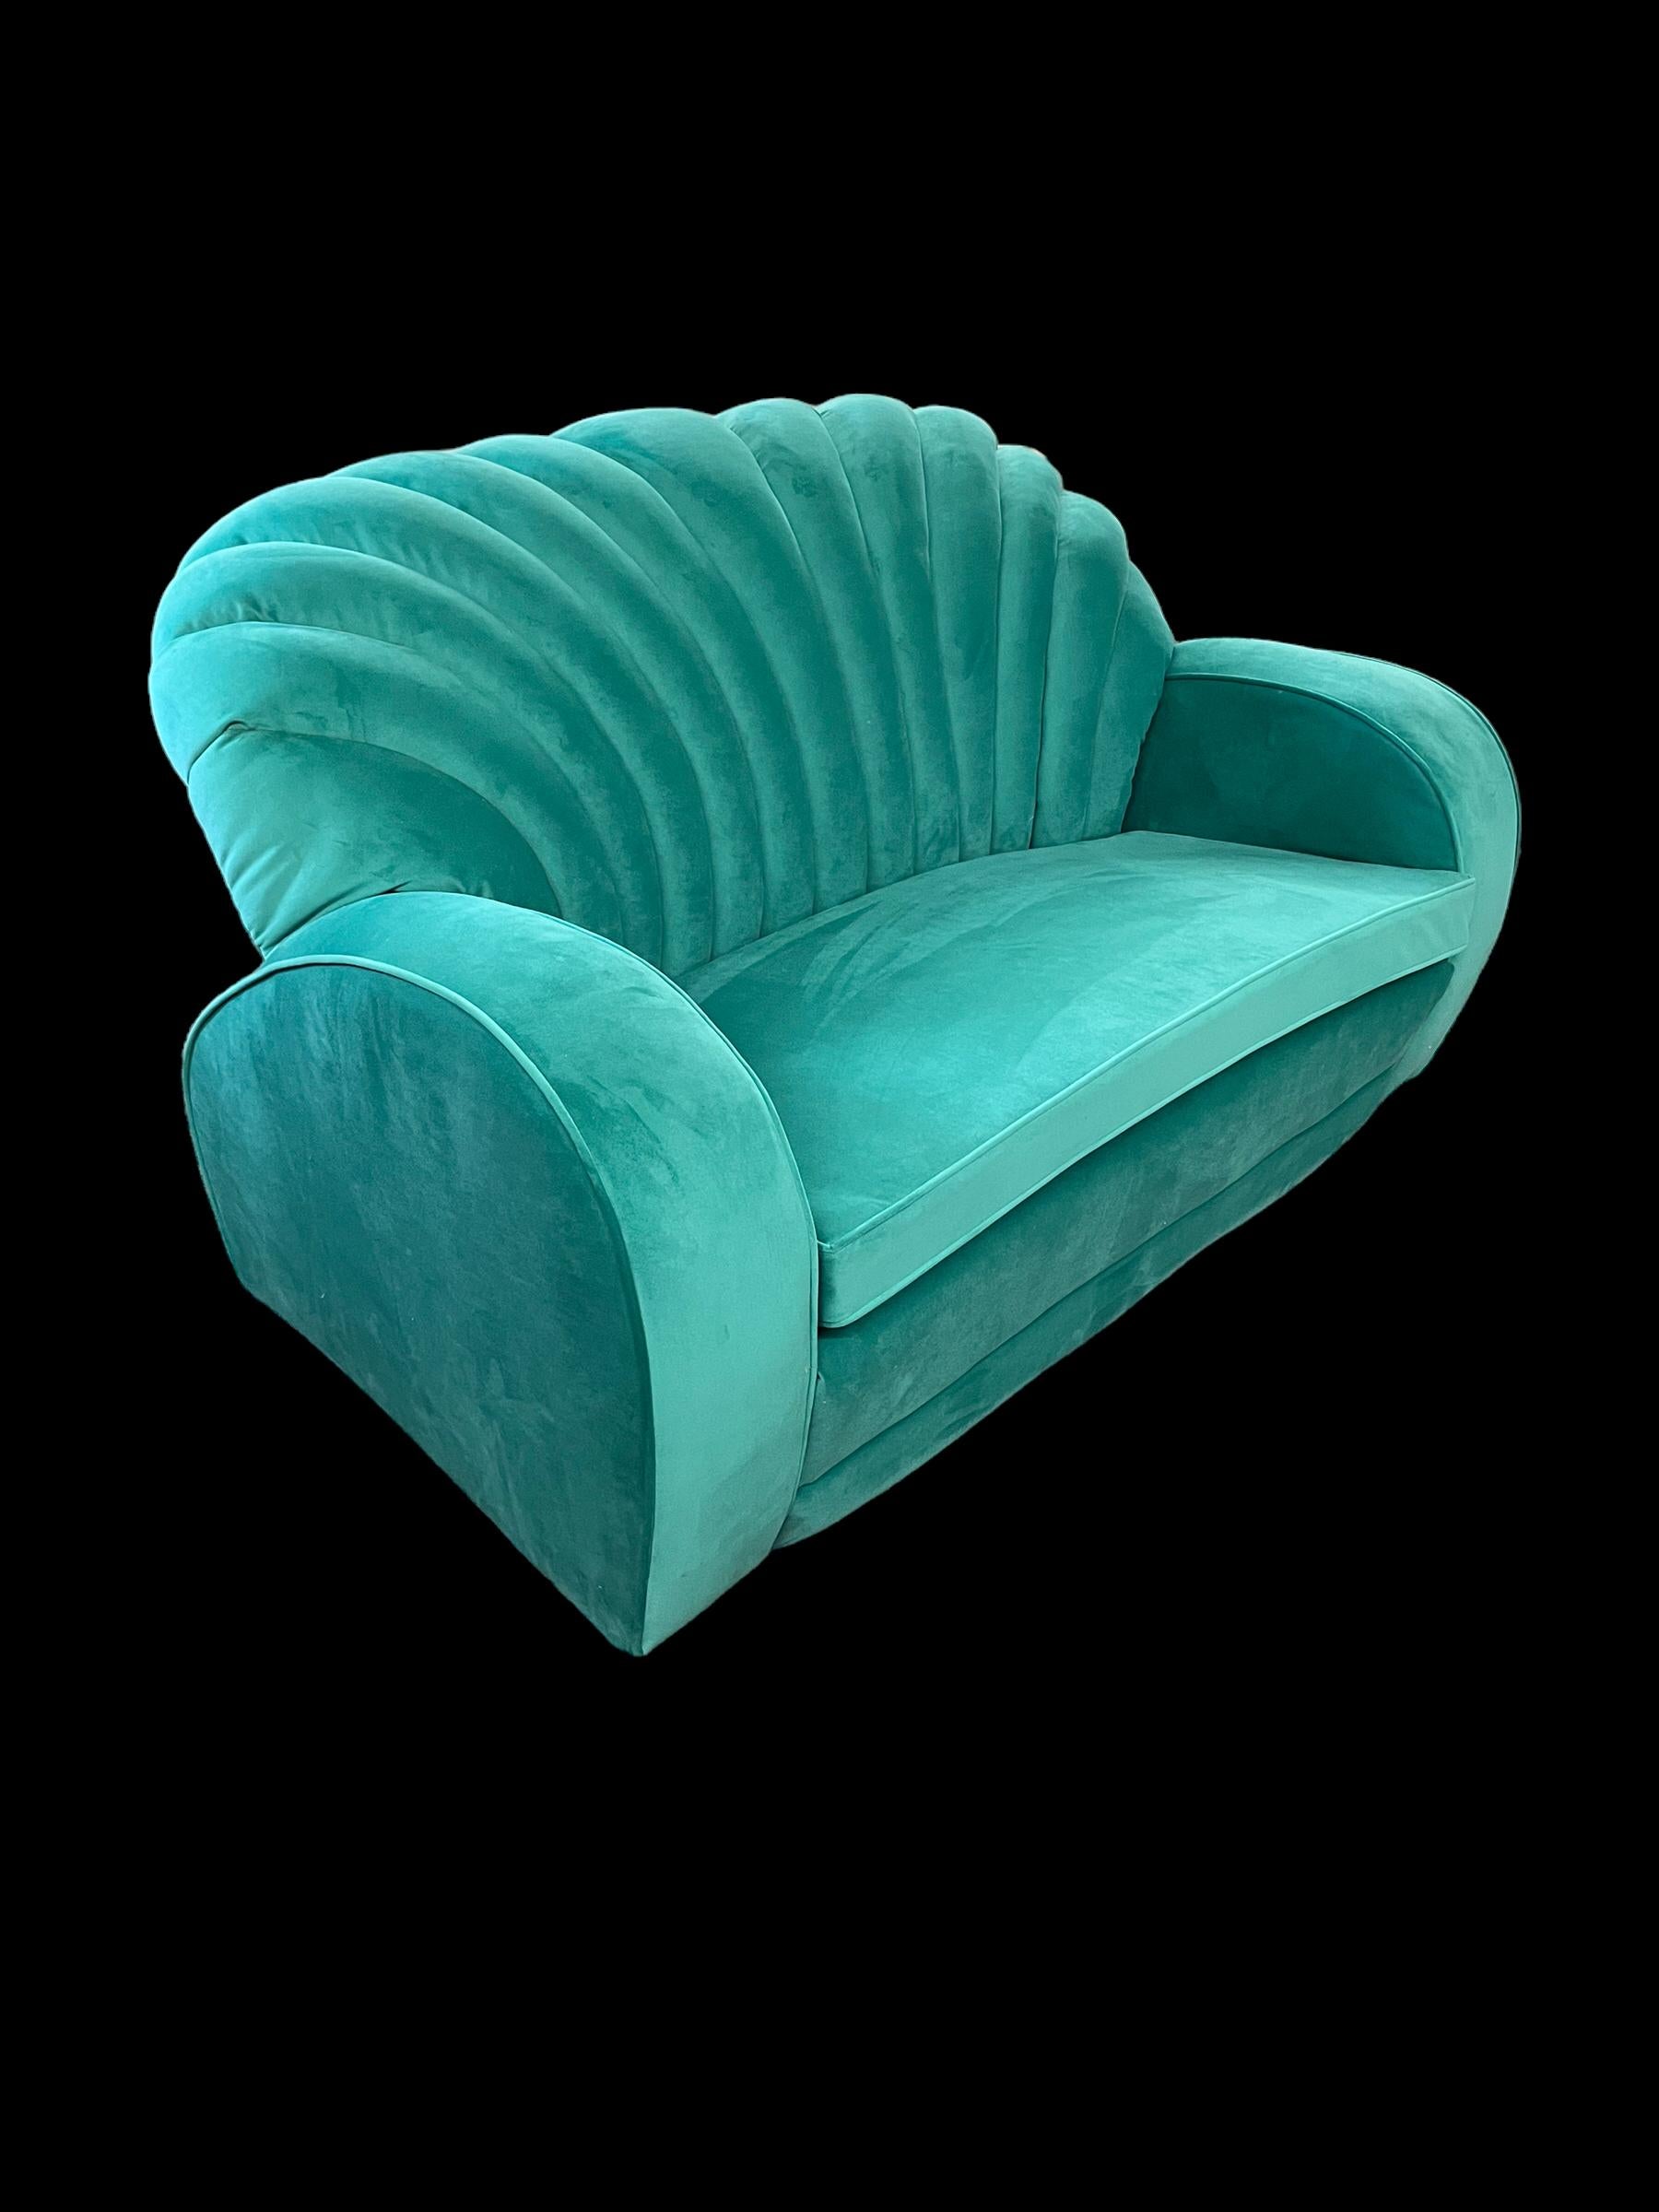 Early 20th Century Art Deco Sofa For Sale